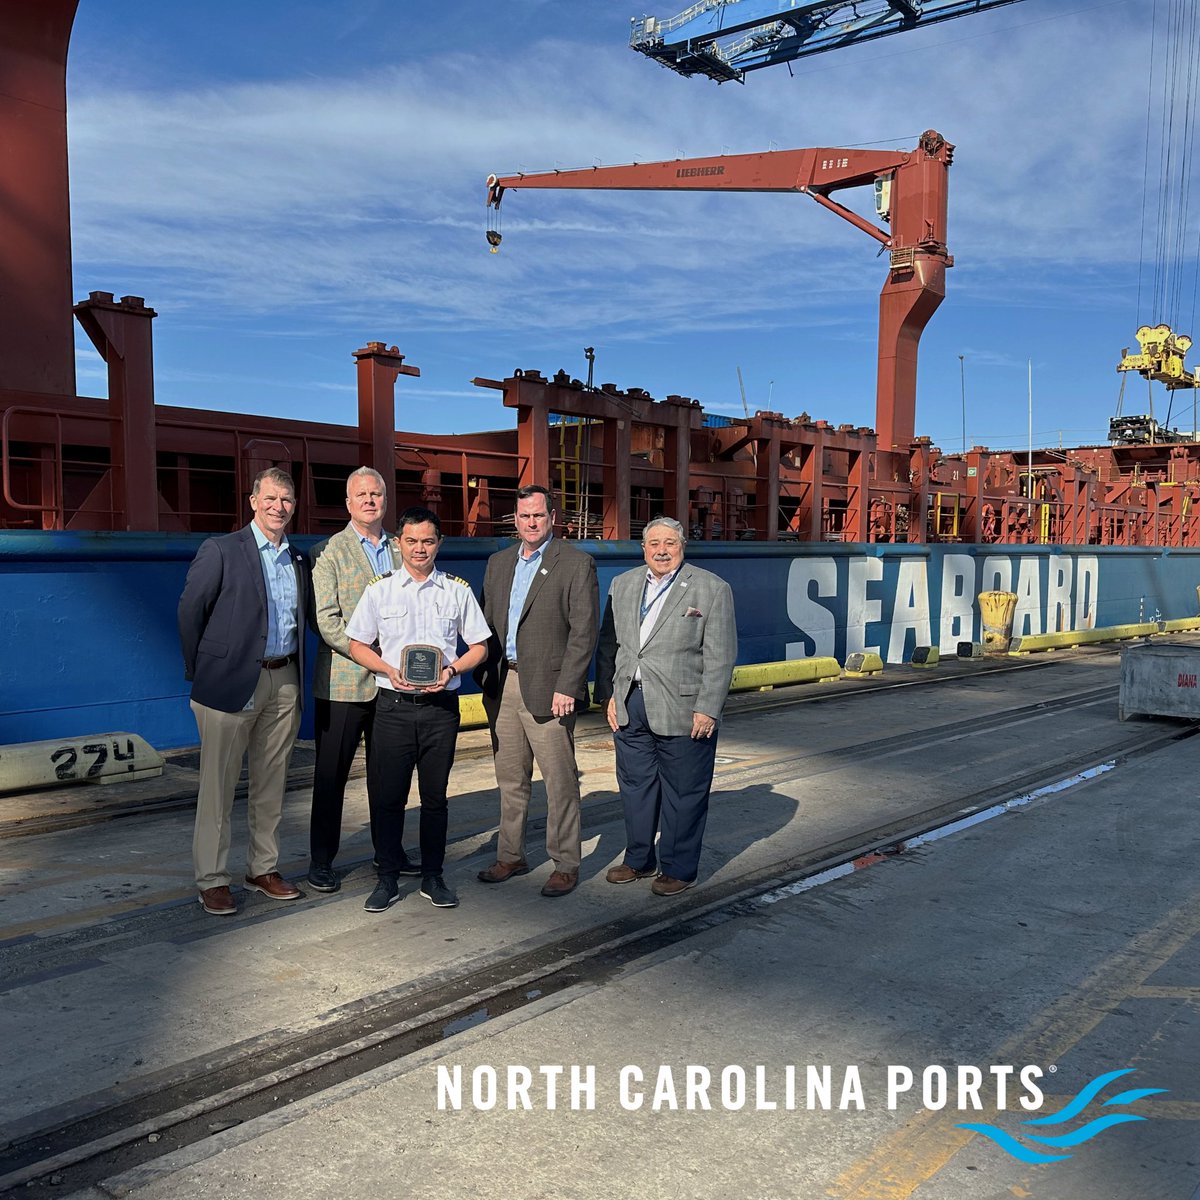 North Carolina Ports welcomes Seaboard Marine to the Port of Wilmington! The Master of the MV Diana J, Captain Jerico Villanueva, was presented with a plaque to commemorate the inaugural call.  You can learn more about this new weekly service here: ncports.com/about-the-port…